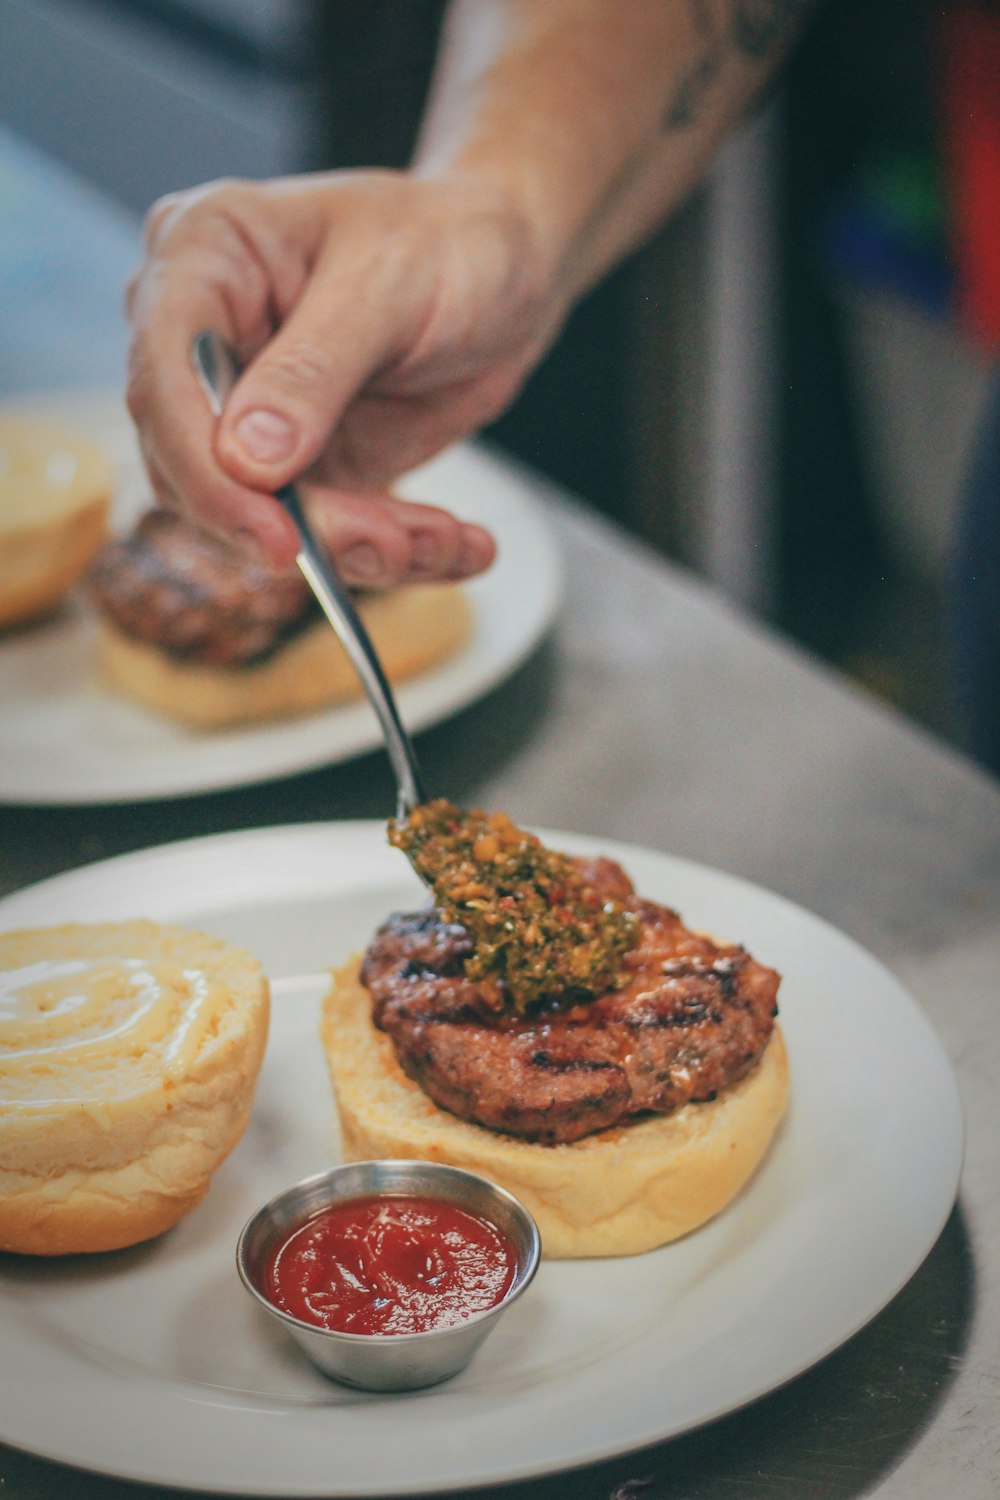 a person cutting into a hamburger on a plate